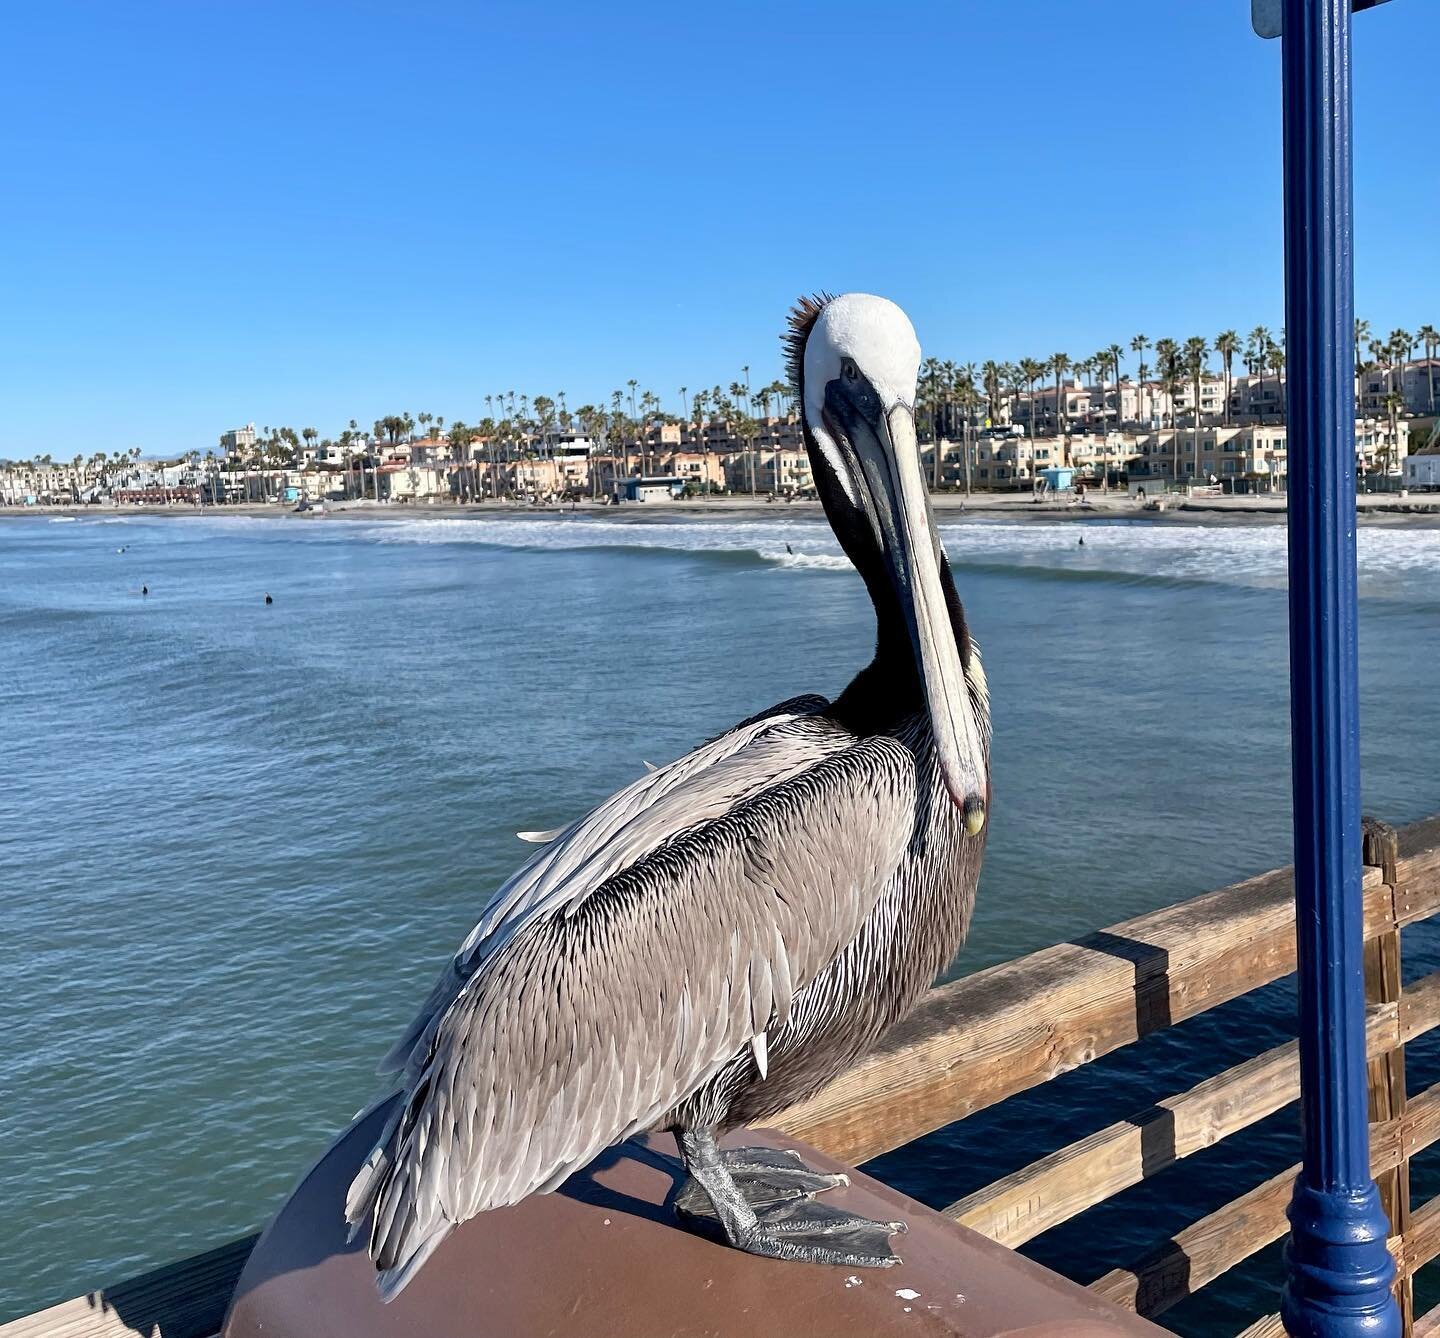 Coffee with Charlie the Pelican at the Pier Shop